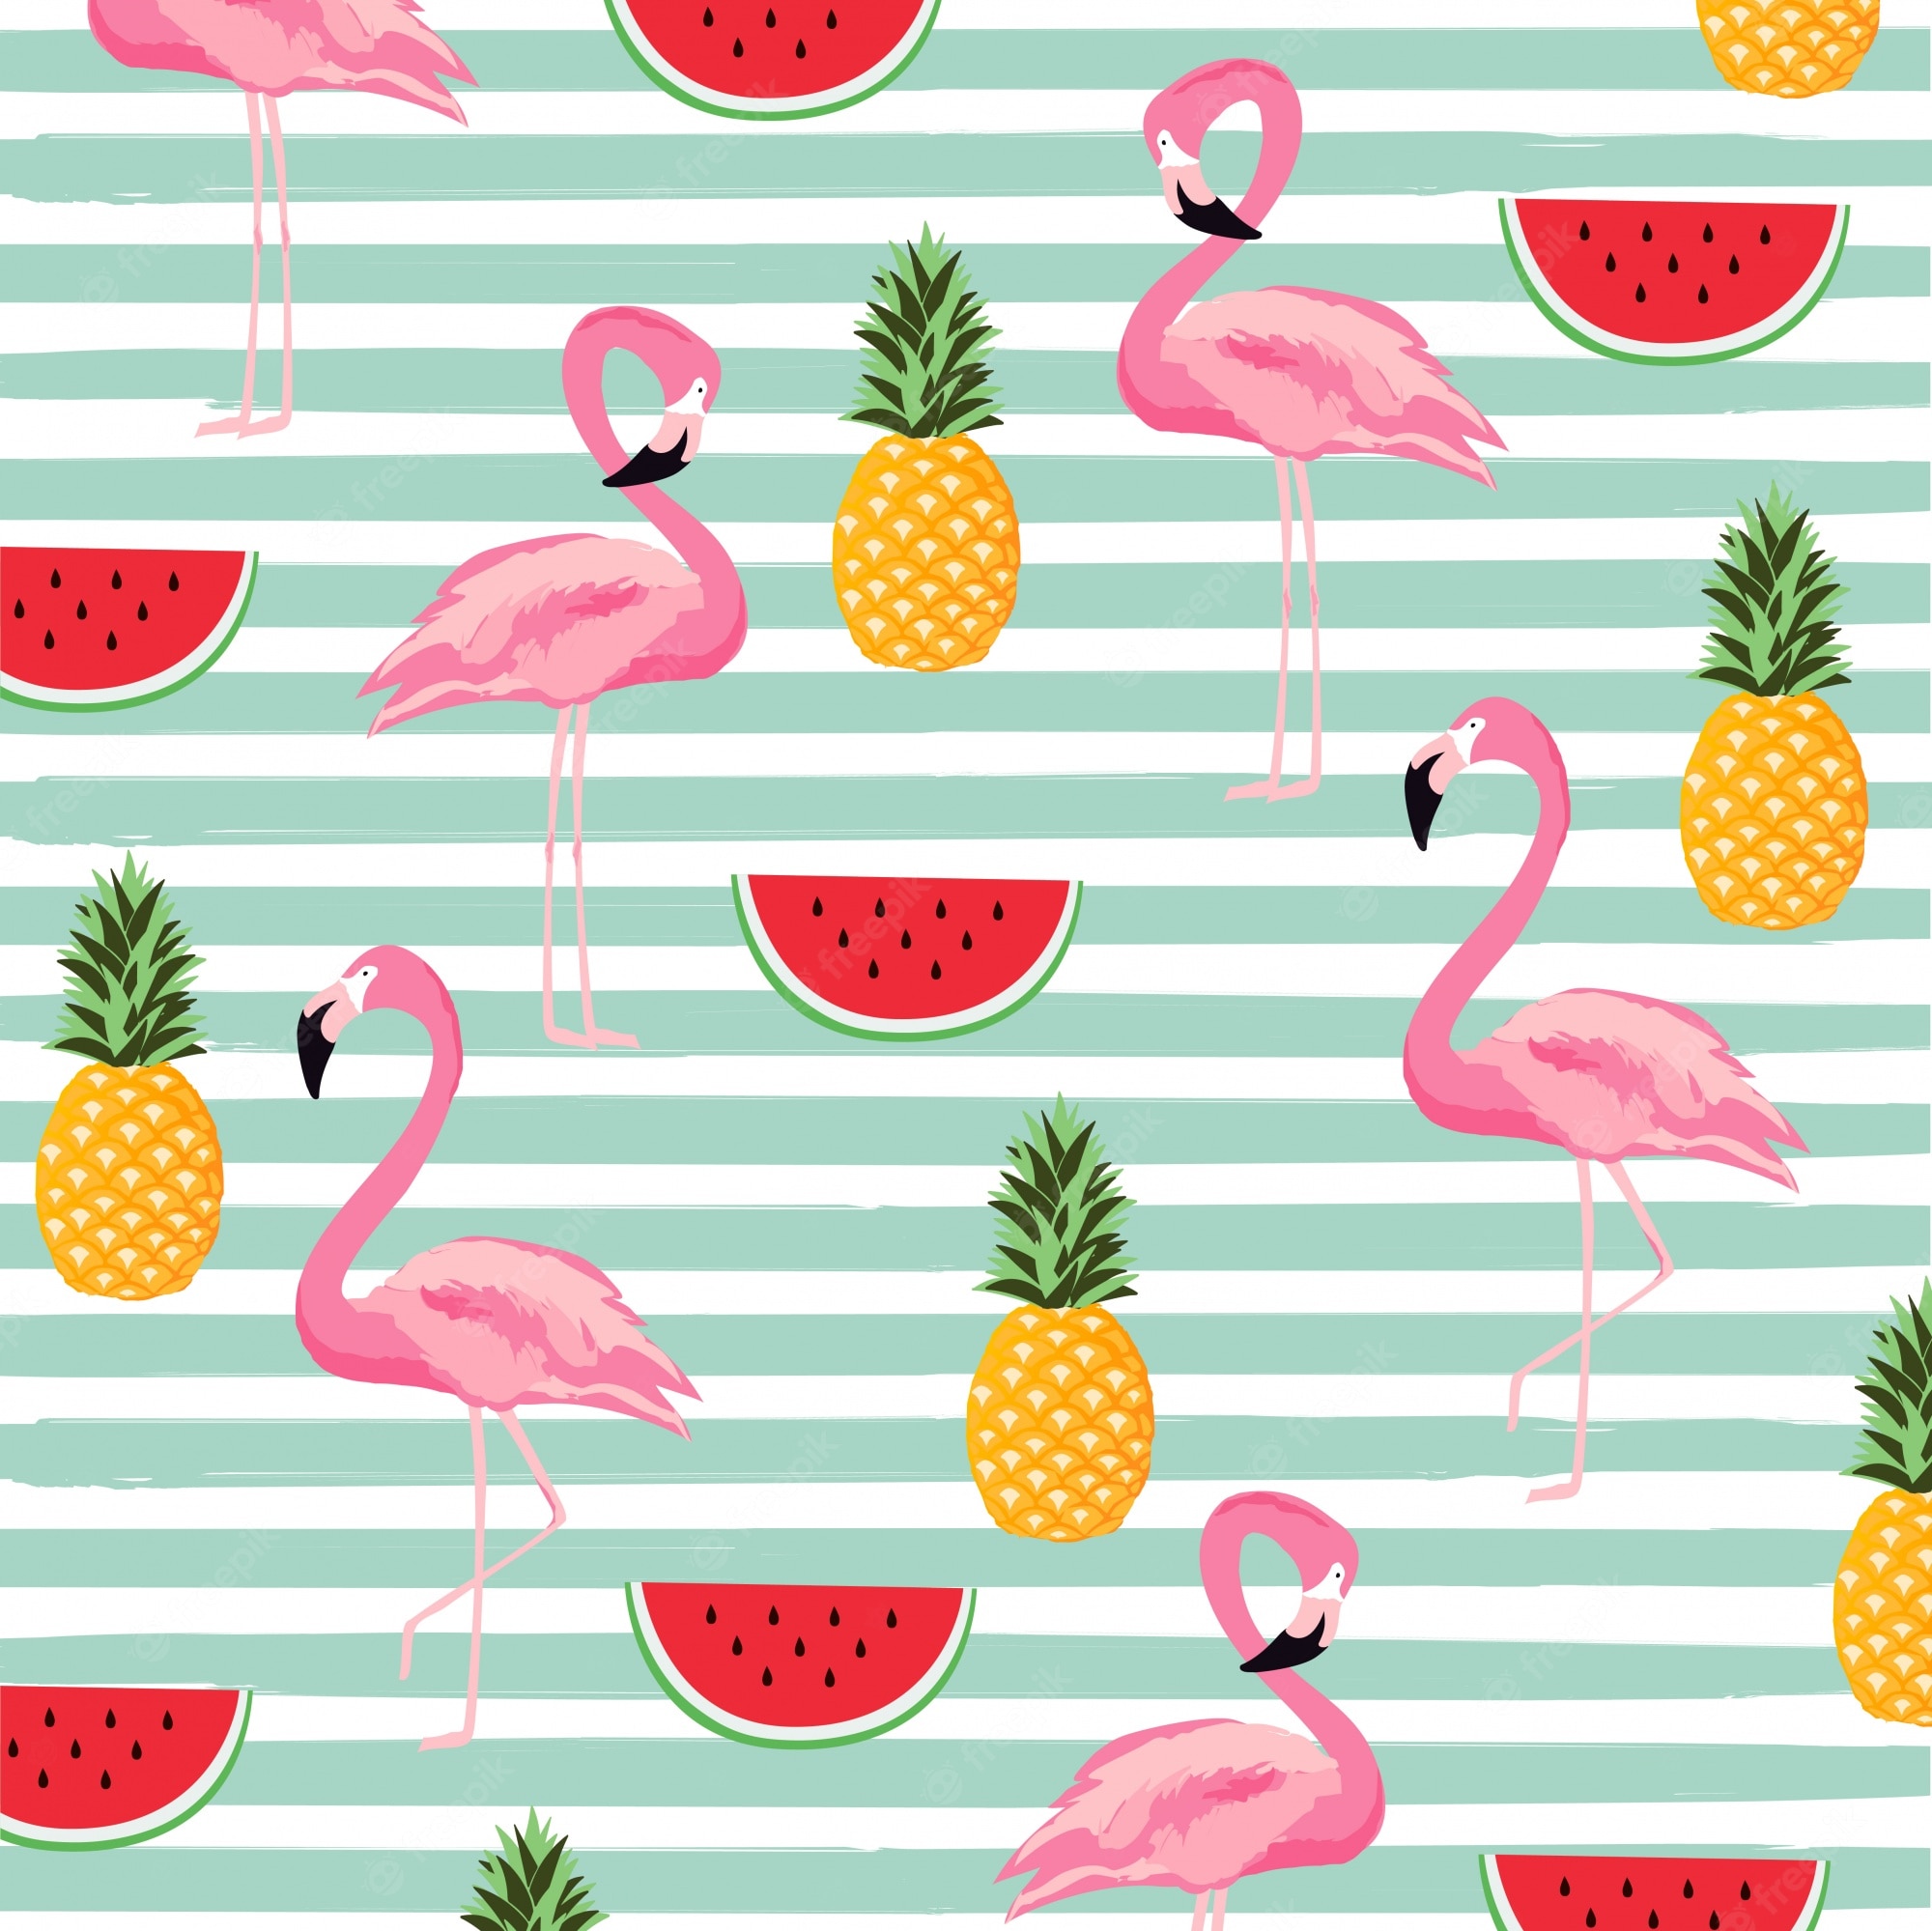 Premium Vector Pineapple Watermelon And Flamingo With Stripes